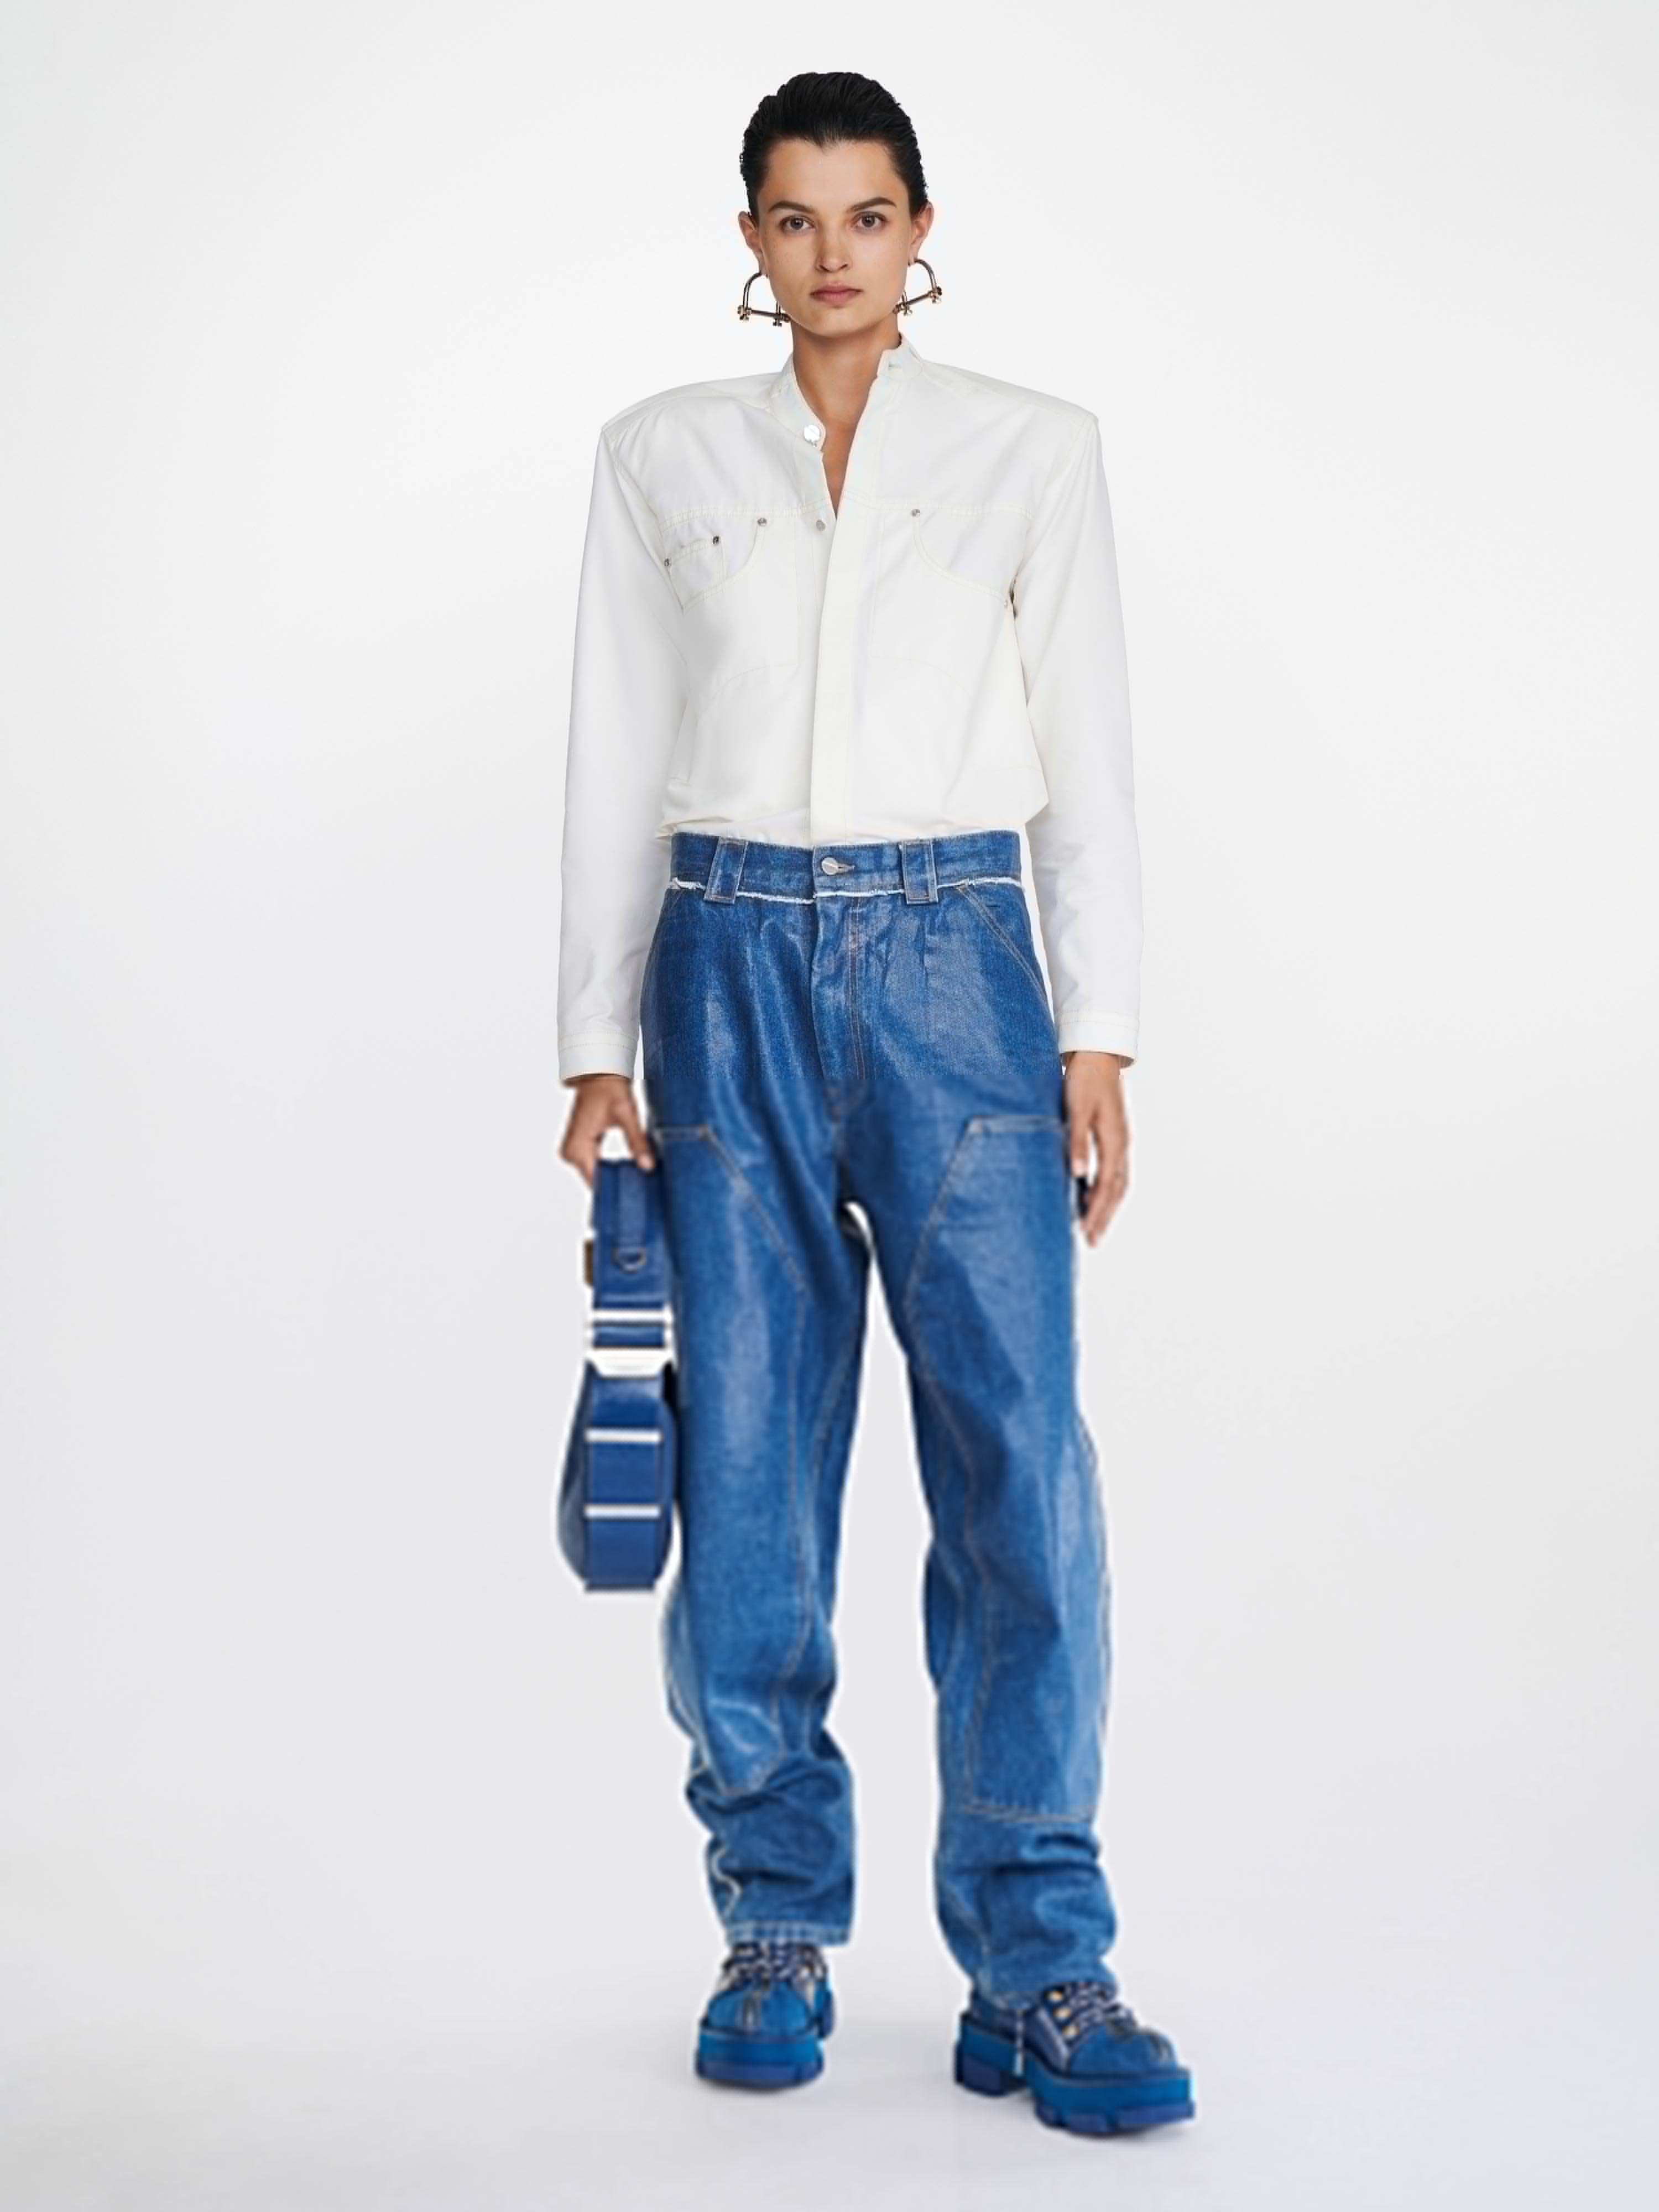 LAMINATED CARPENTER JEAN by DION LEE